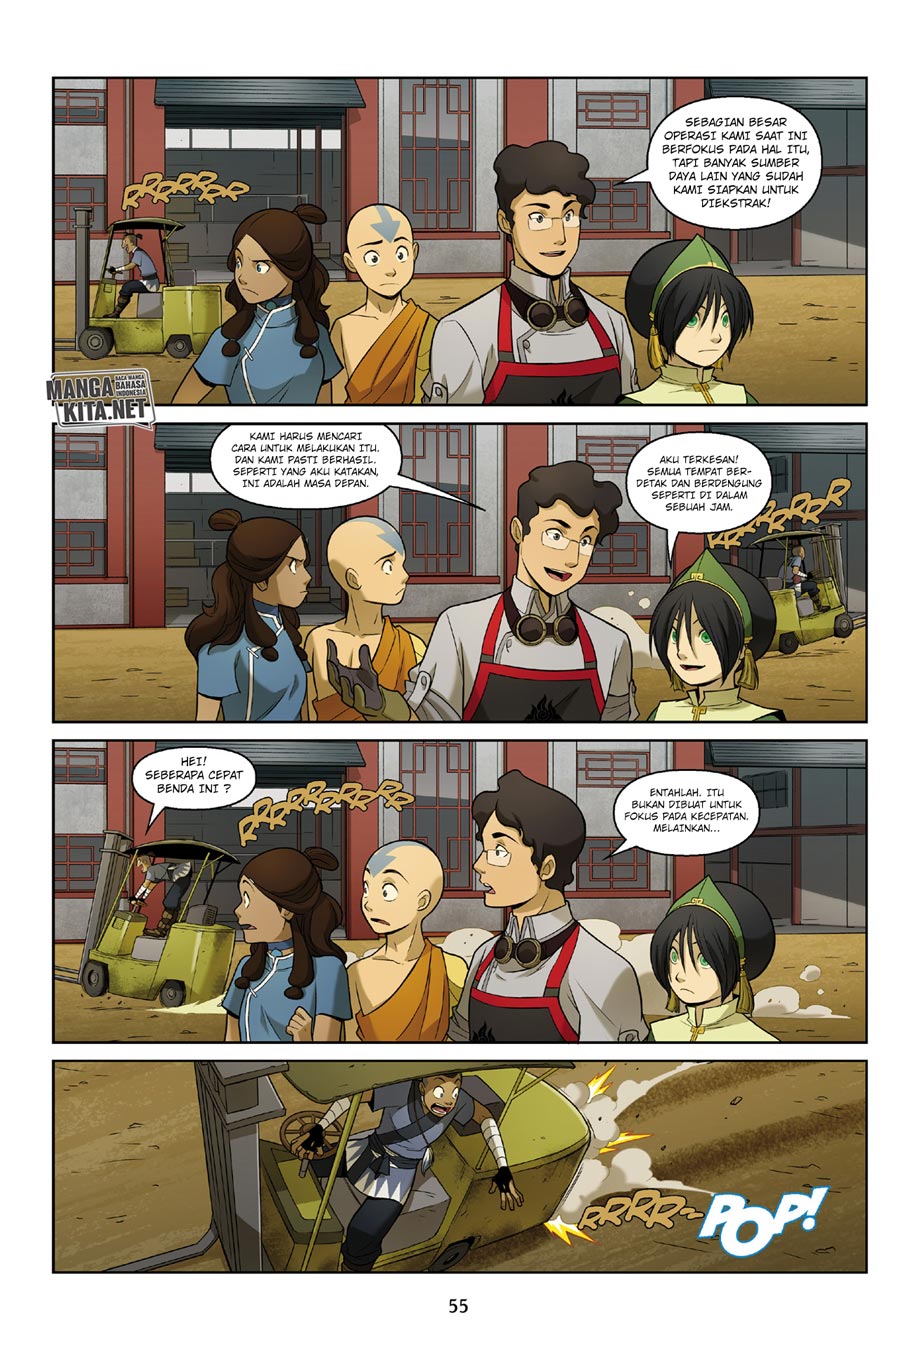 Avatar The Last Airbender – The Rift Chapter 1.3